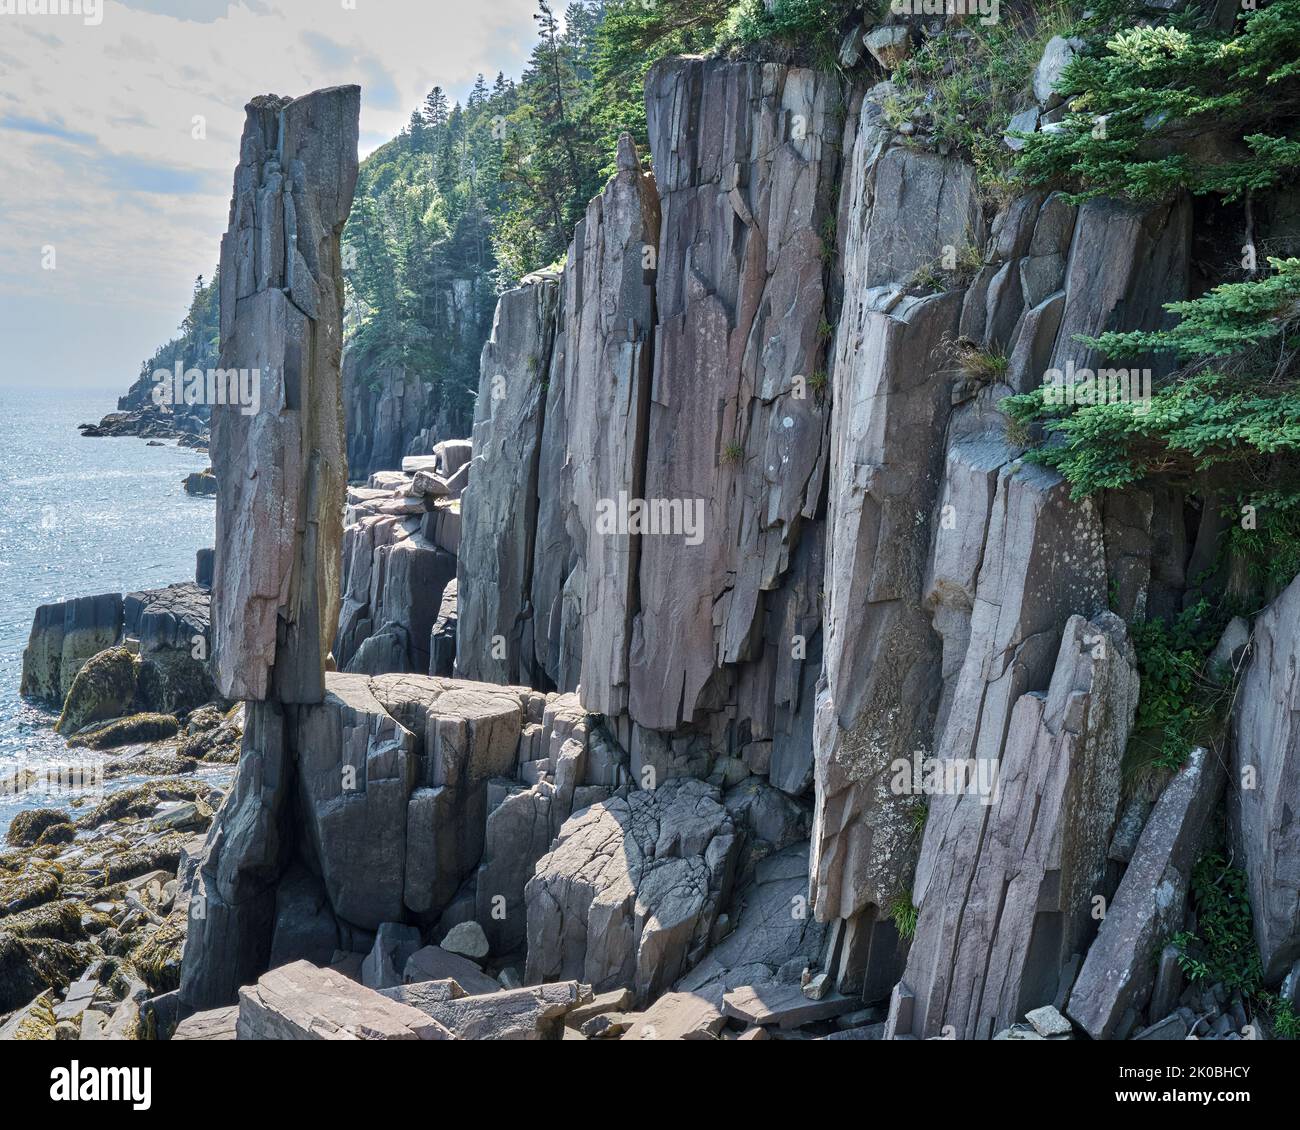 Located near Tiverton Nova Scotia balancing rock is a 20 ton slab of volcanic basalt that appears to be balancing precariously on a ledge. Stock Photo